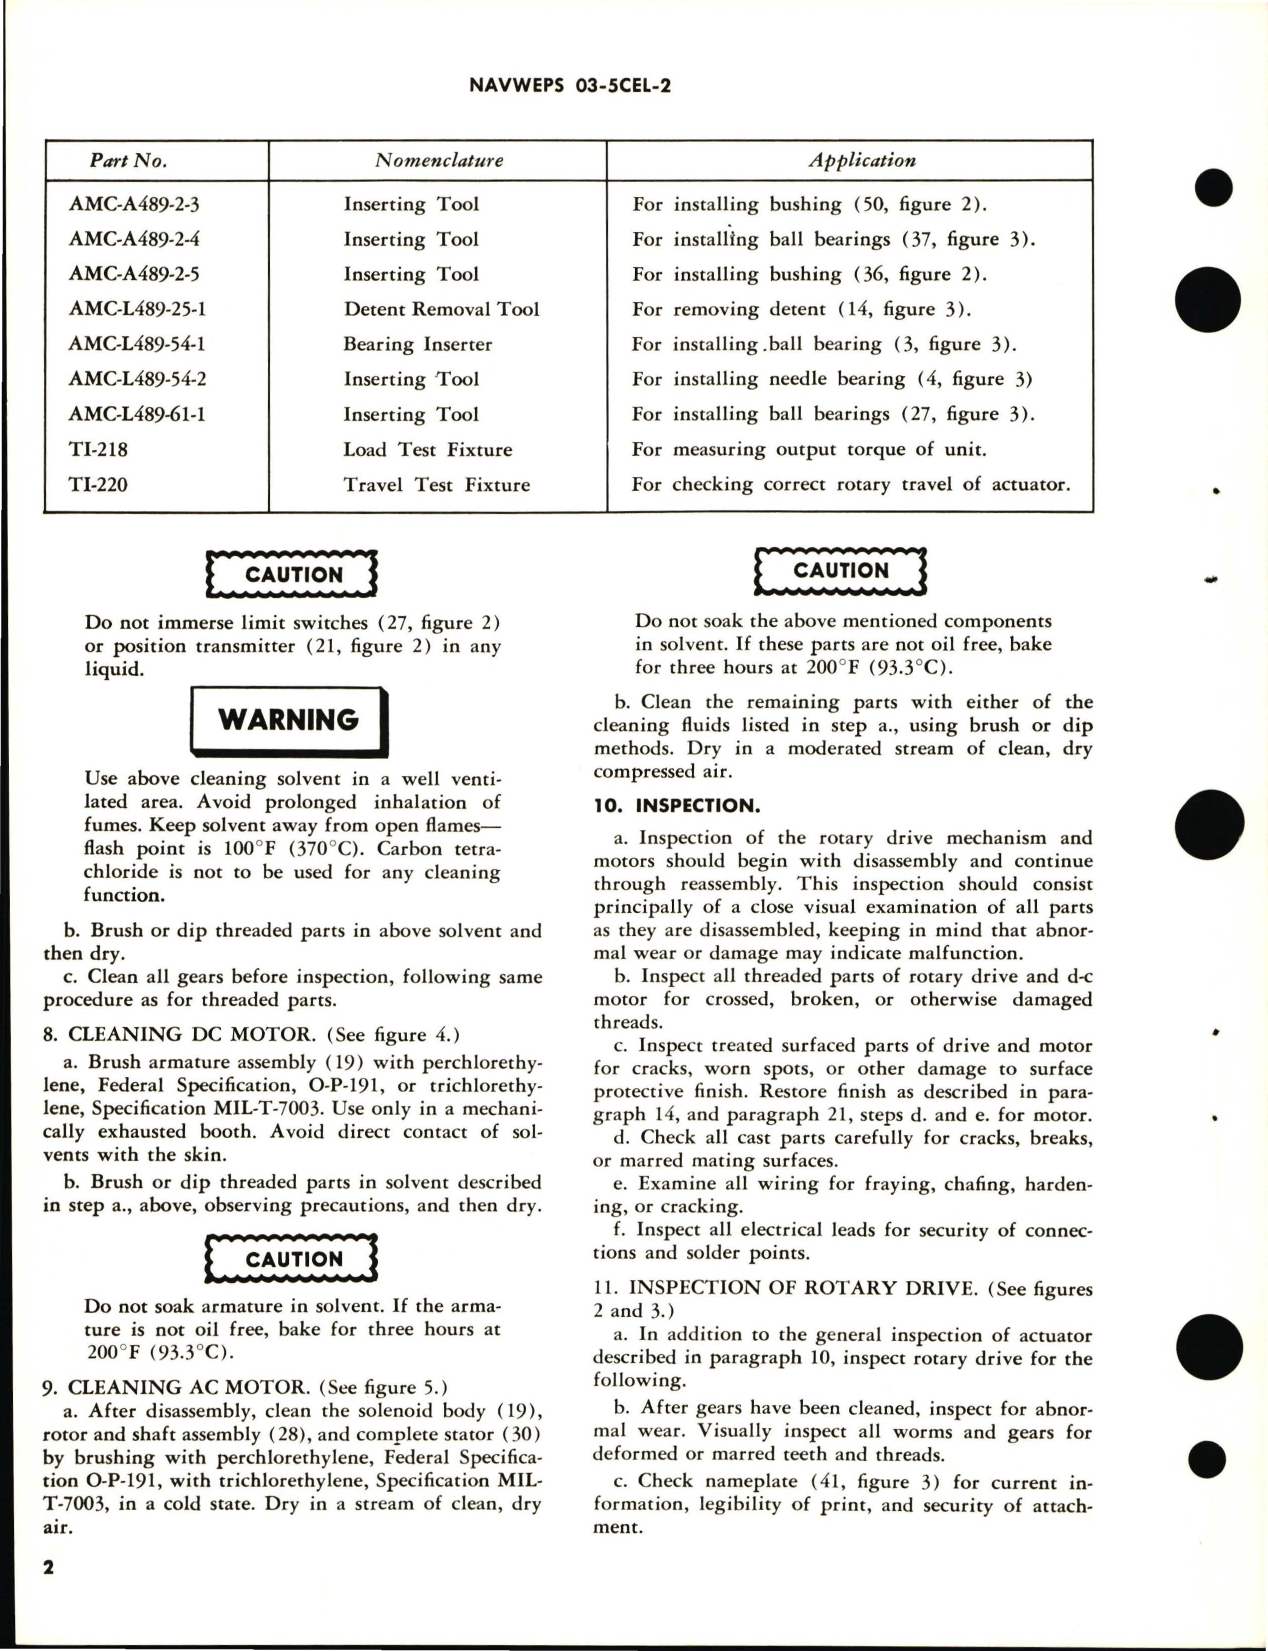 Sample page 6 from AirCorps Library document: Overhaul Instructions with Parts Breakdown for Gear Box, Motor Driven - Part A489-3